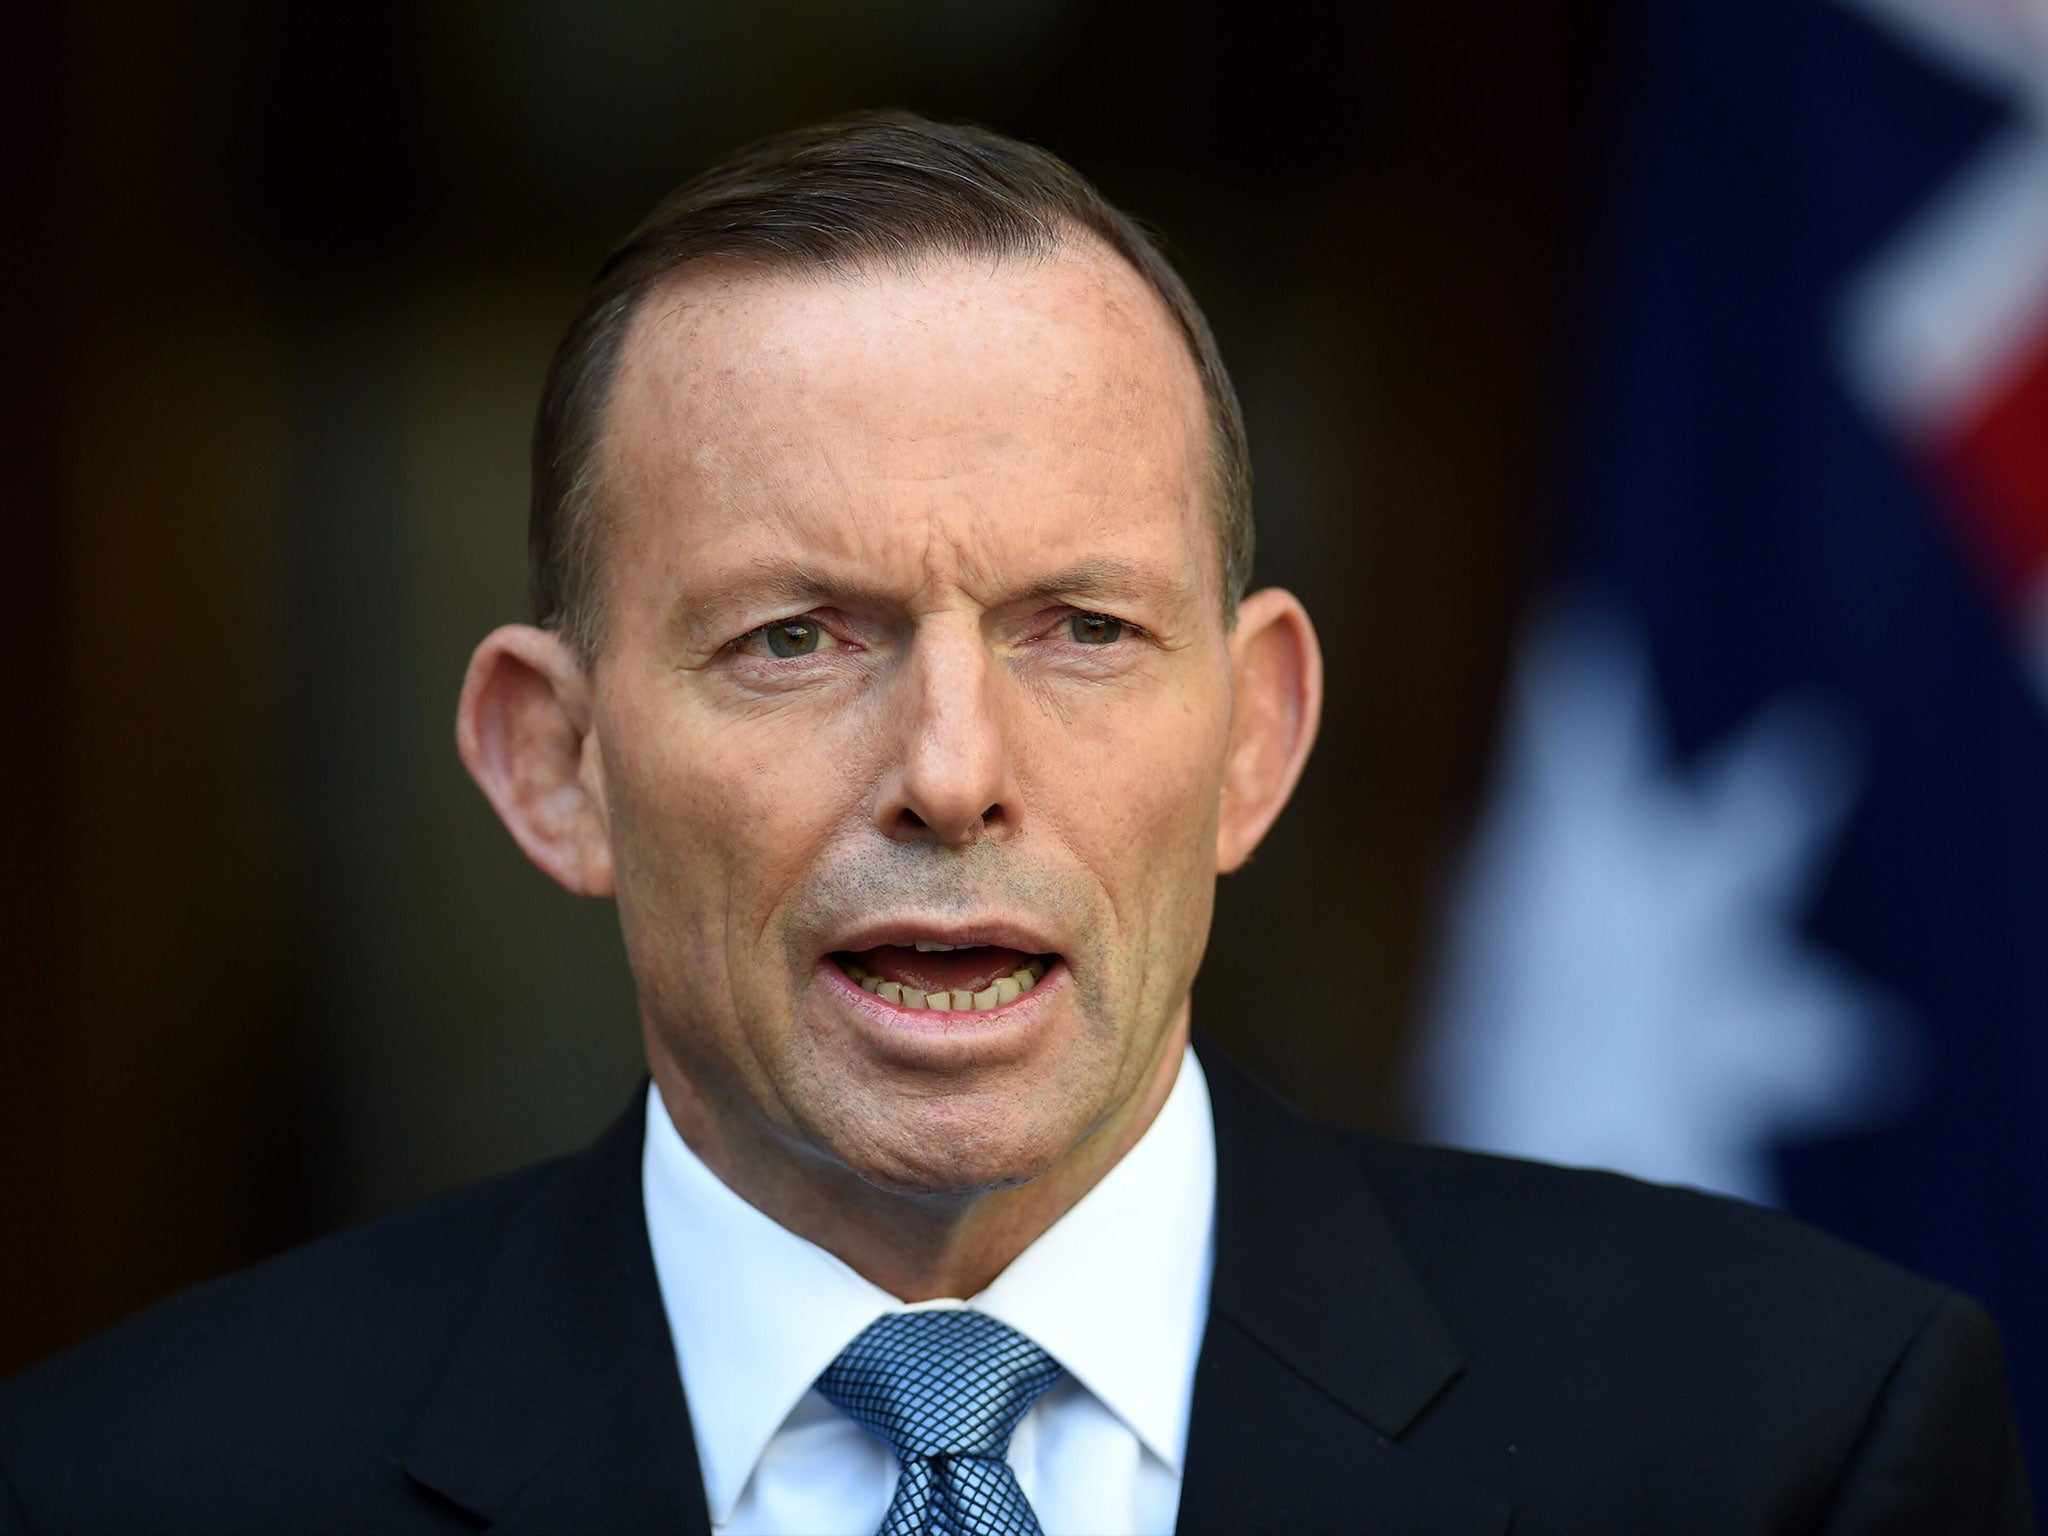 Mr Abbott was responding to news that the mother of a seven-year-old boy photographed holding the severed head of a Syrian soldier, wants to bring her family back to Sydney